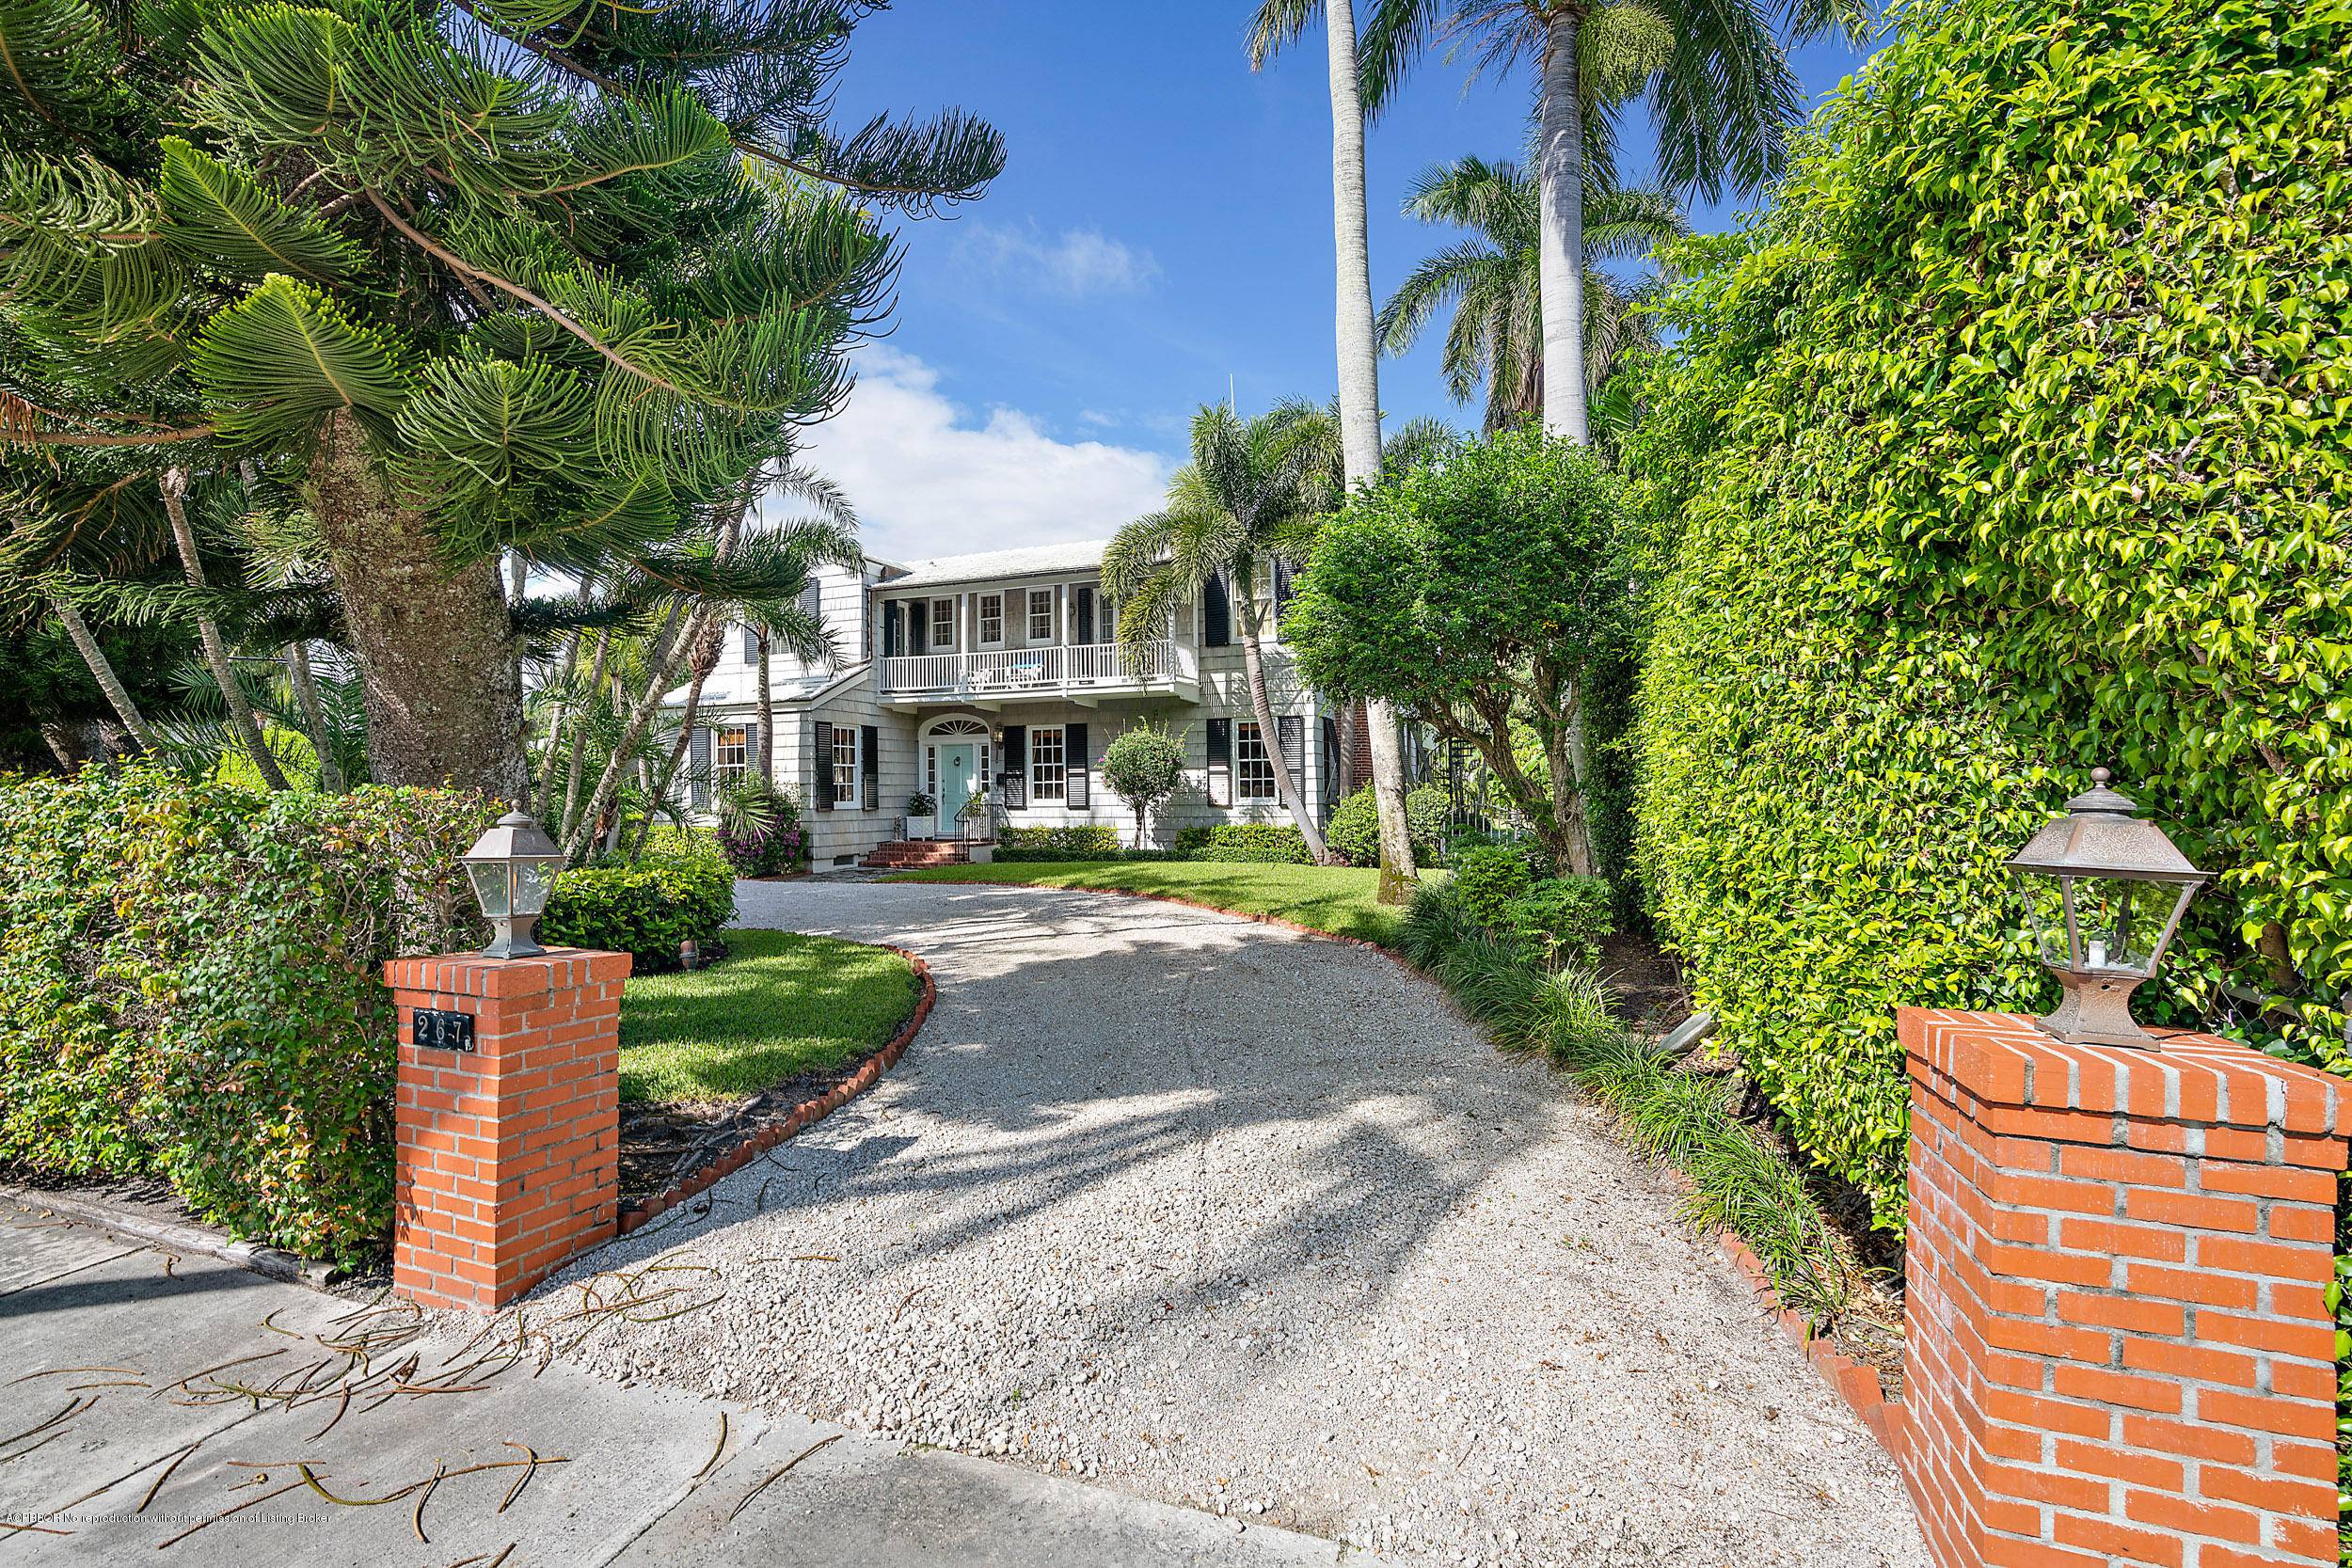 Remarkable Monterey style residence in a prime location in Palm Beach.